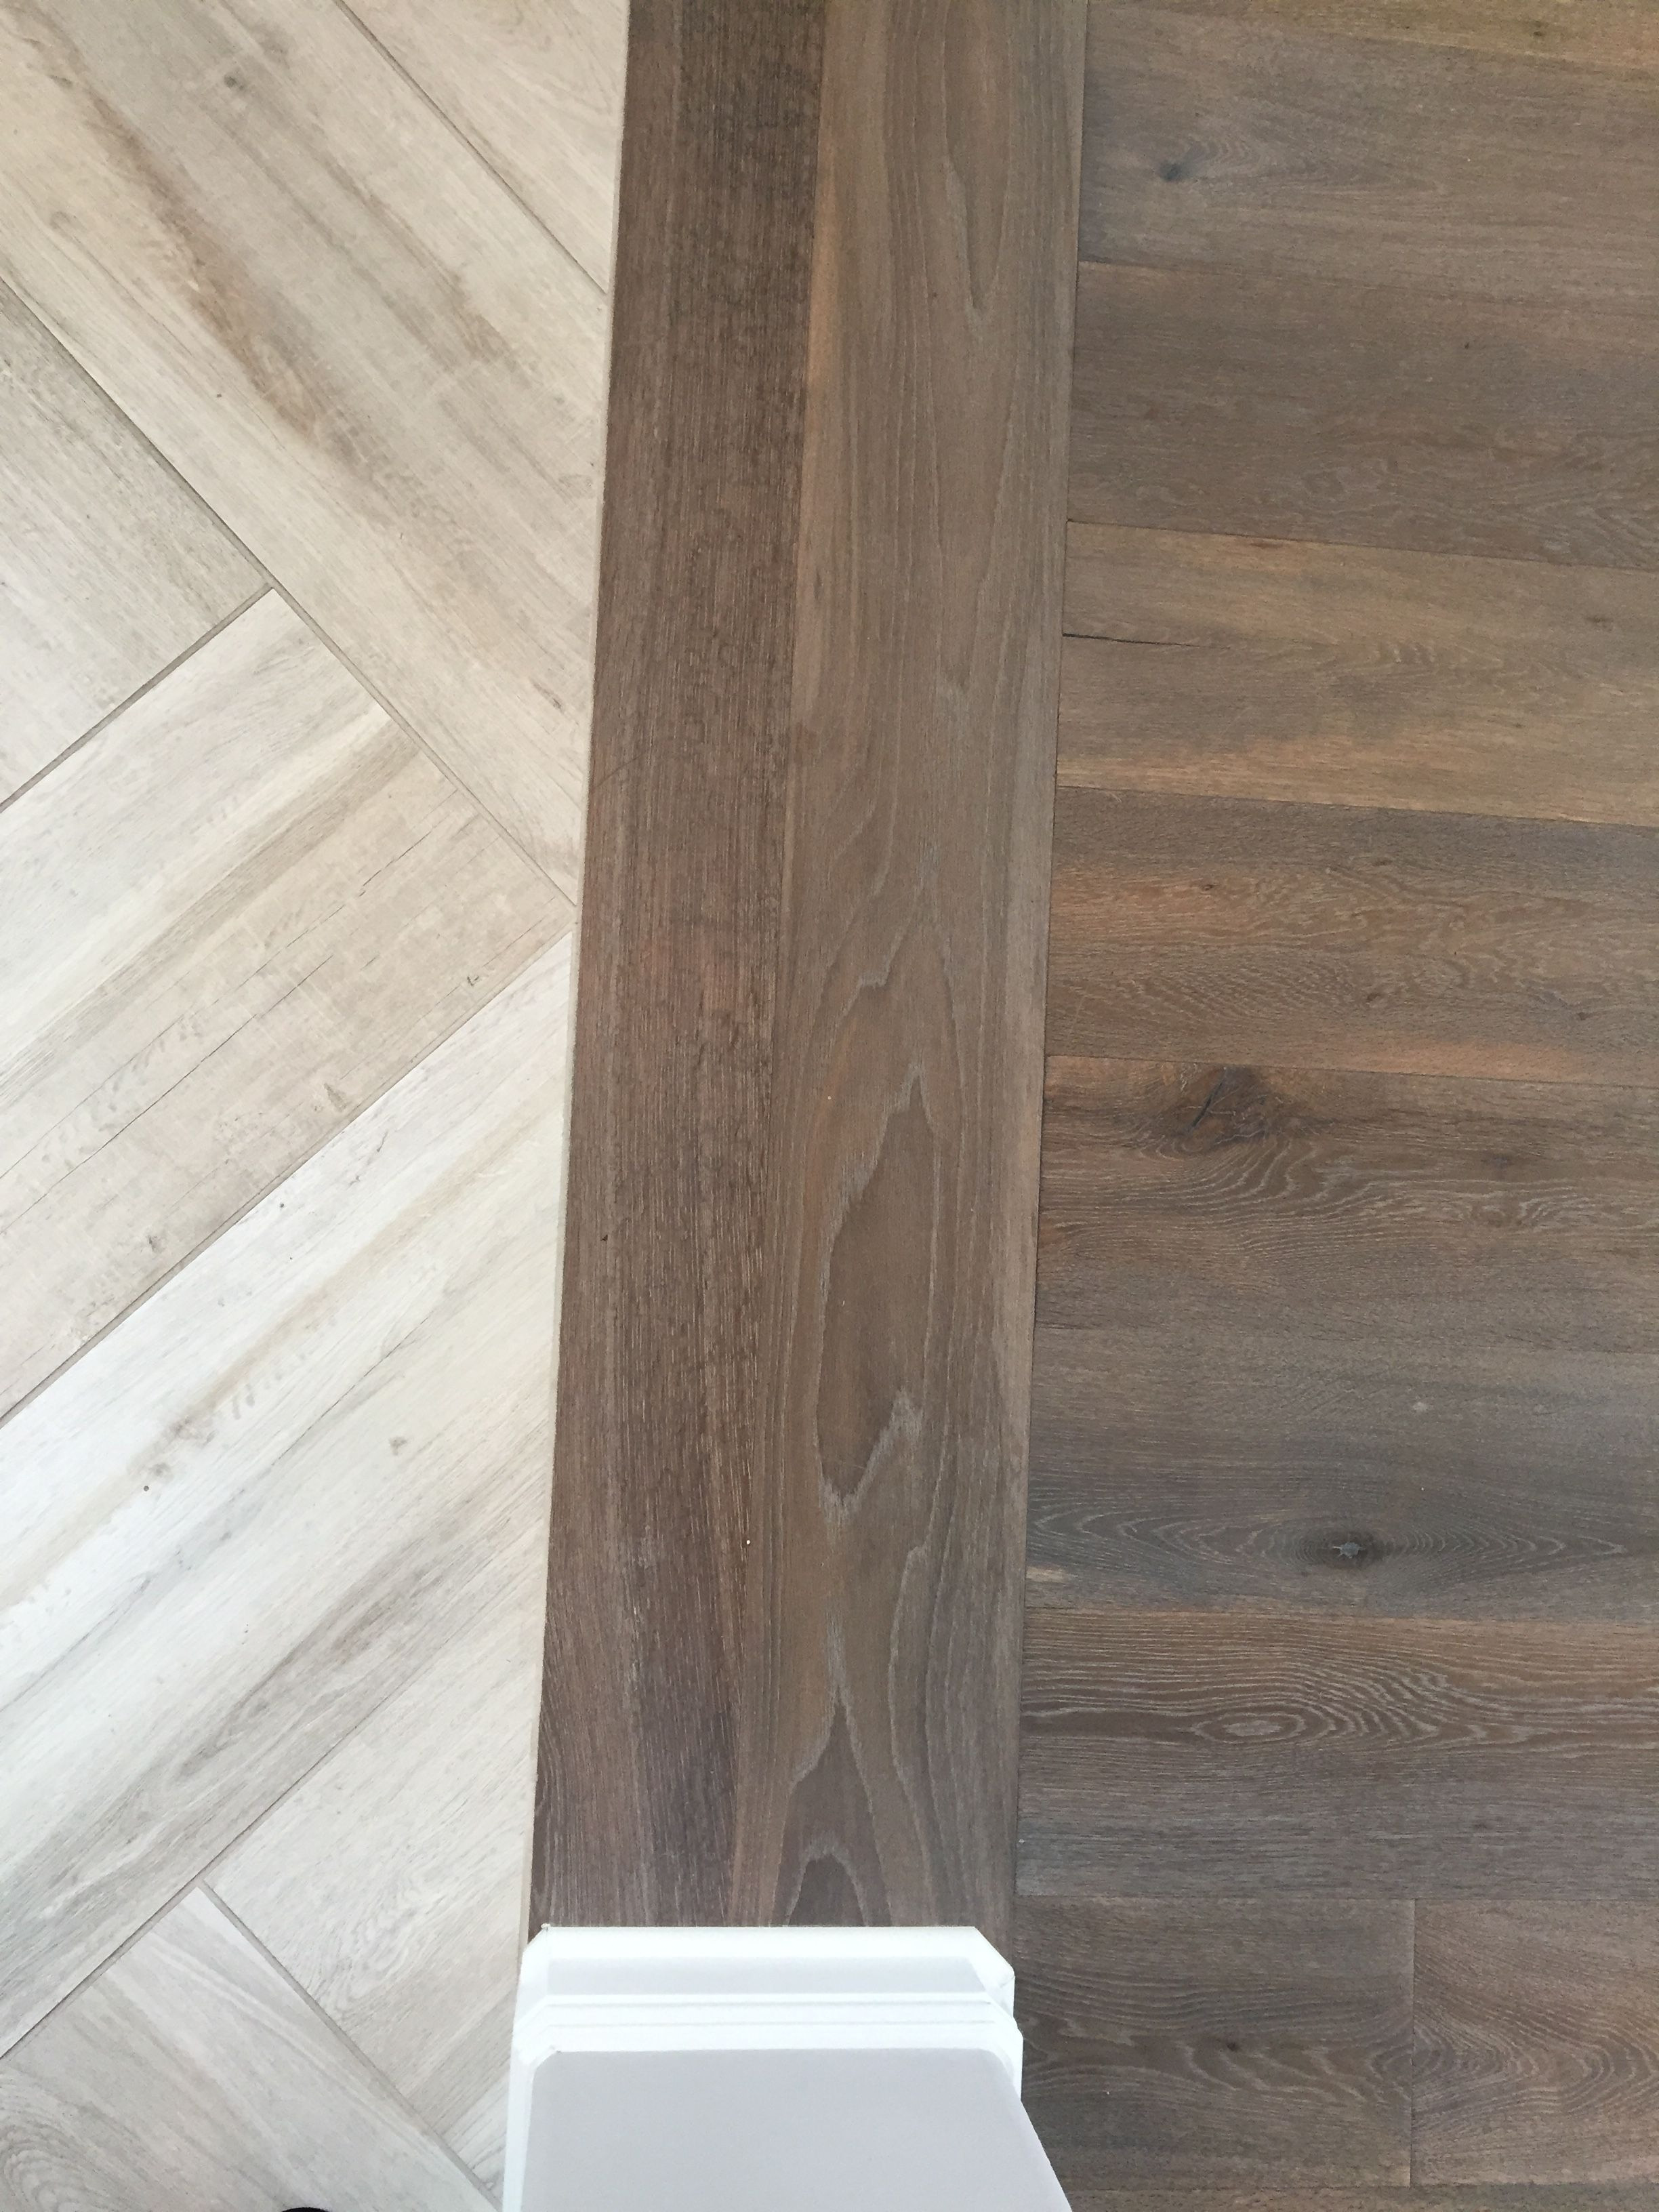 Can You Put Hardwood Floors Over Tile Of Transition Pieces for Laminate Flooring Lovely Laminate Floor Tiles Inside Transition Pieces for Laminate Flooring Fresh Floor Transition Laminate to Herringbone Tile Pattern Pictures Of Transition